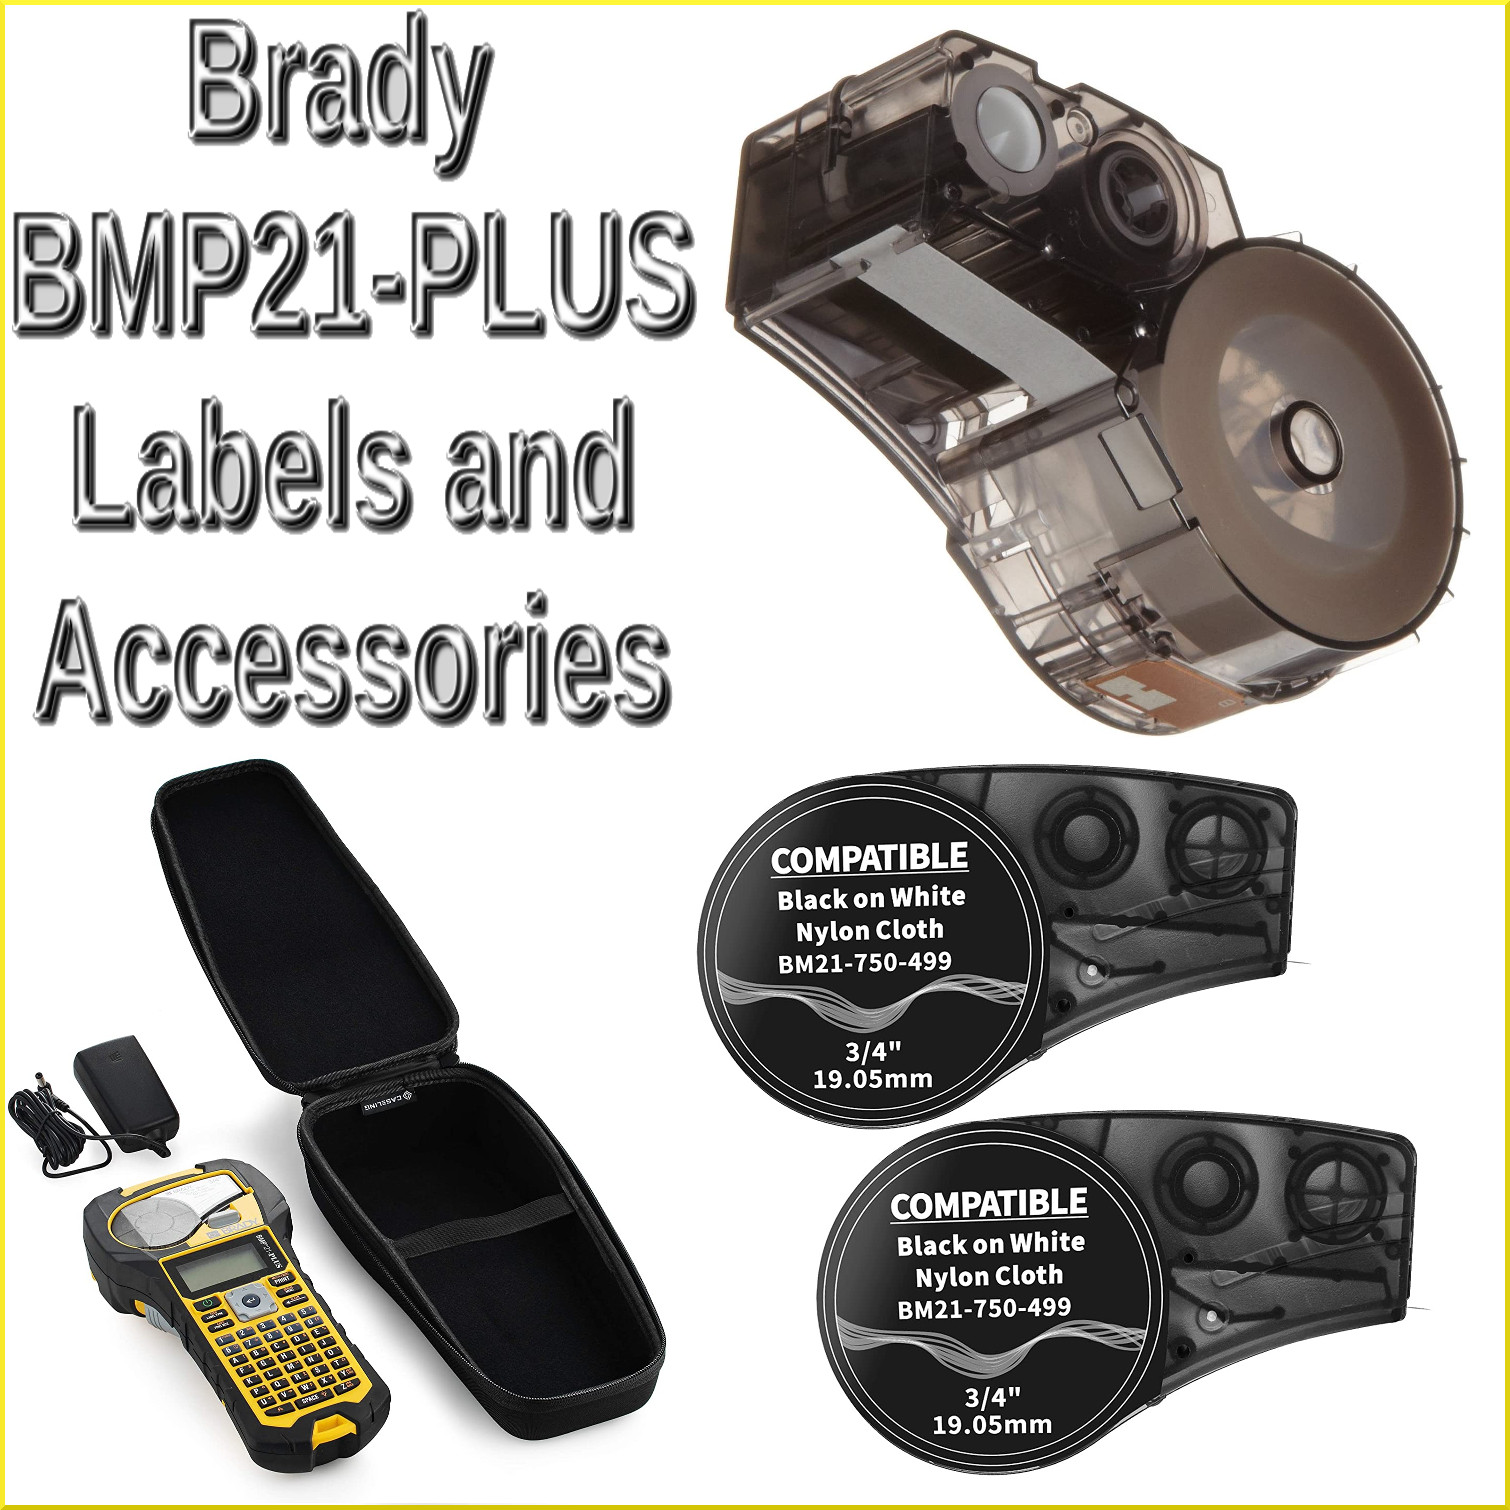 Labels and Accessories for Brady BMP21-PLUS Label Printers